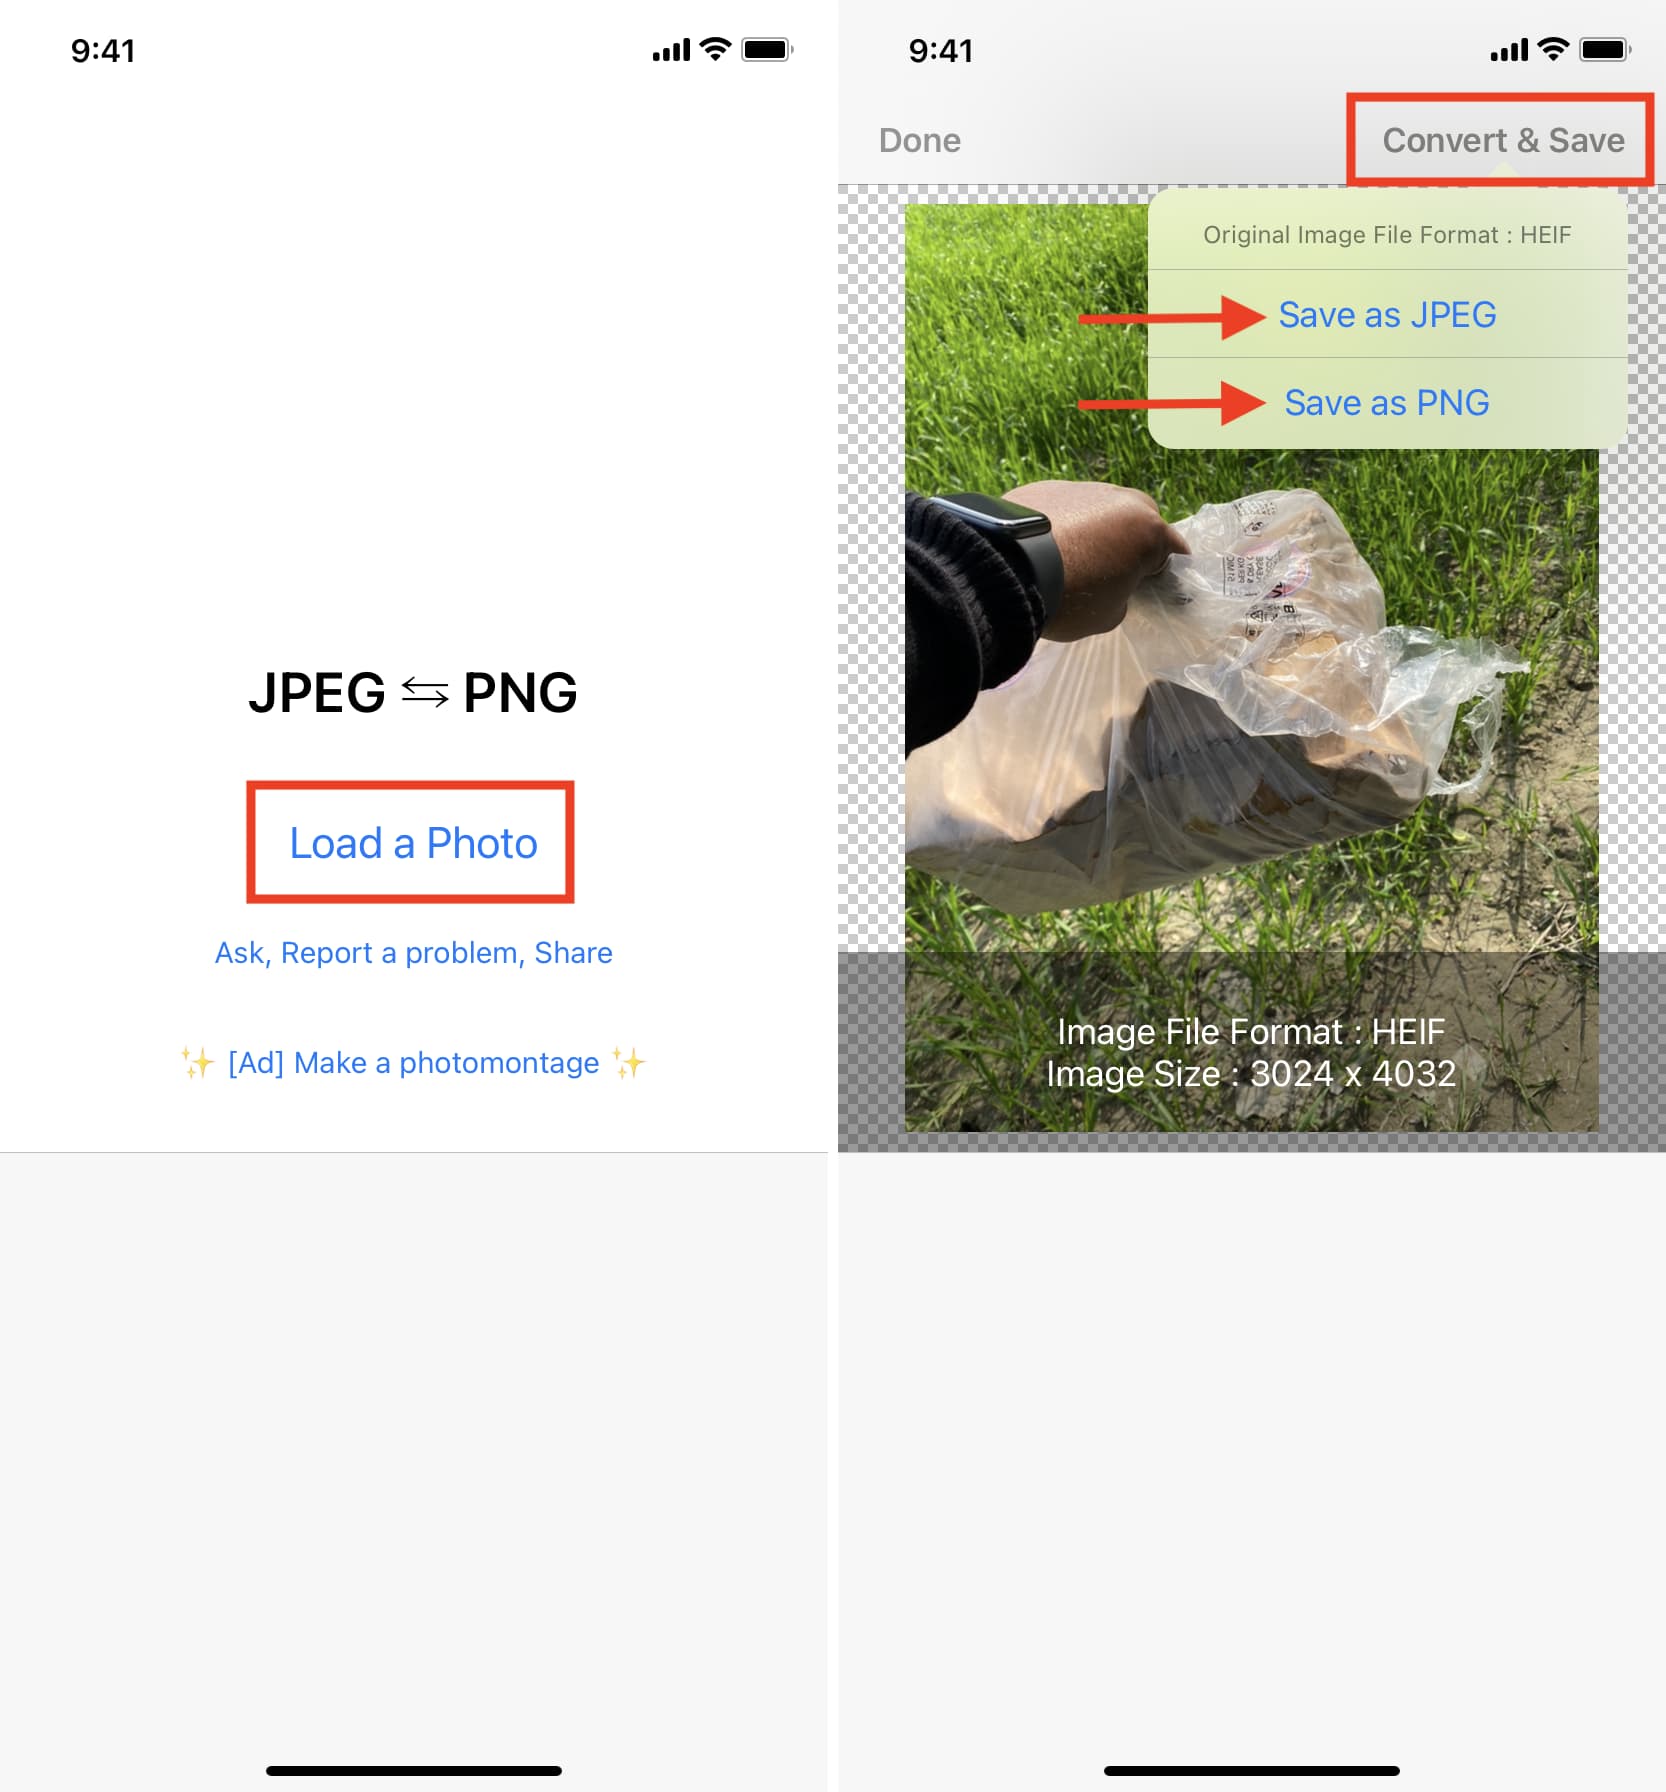 Convert image to JPG or PNG using free iPhone app